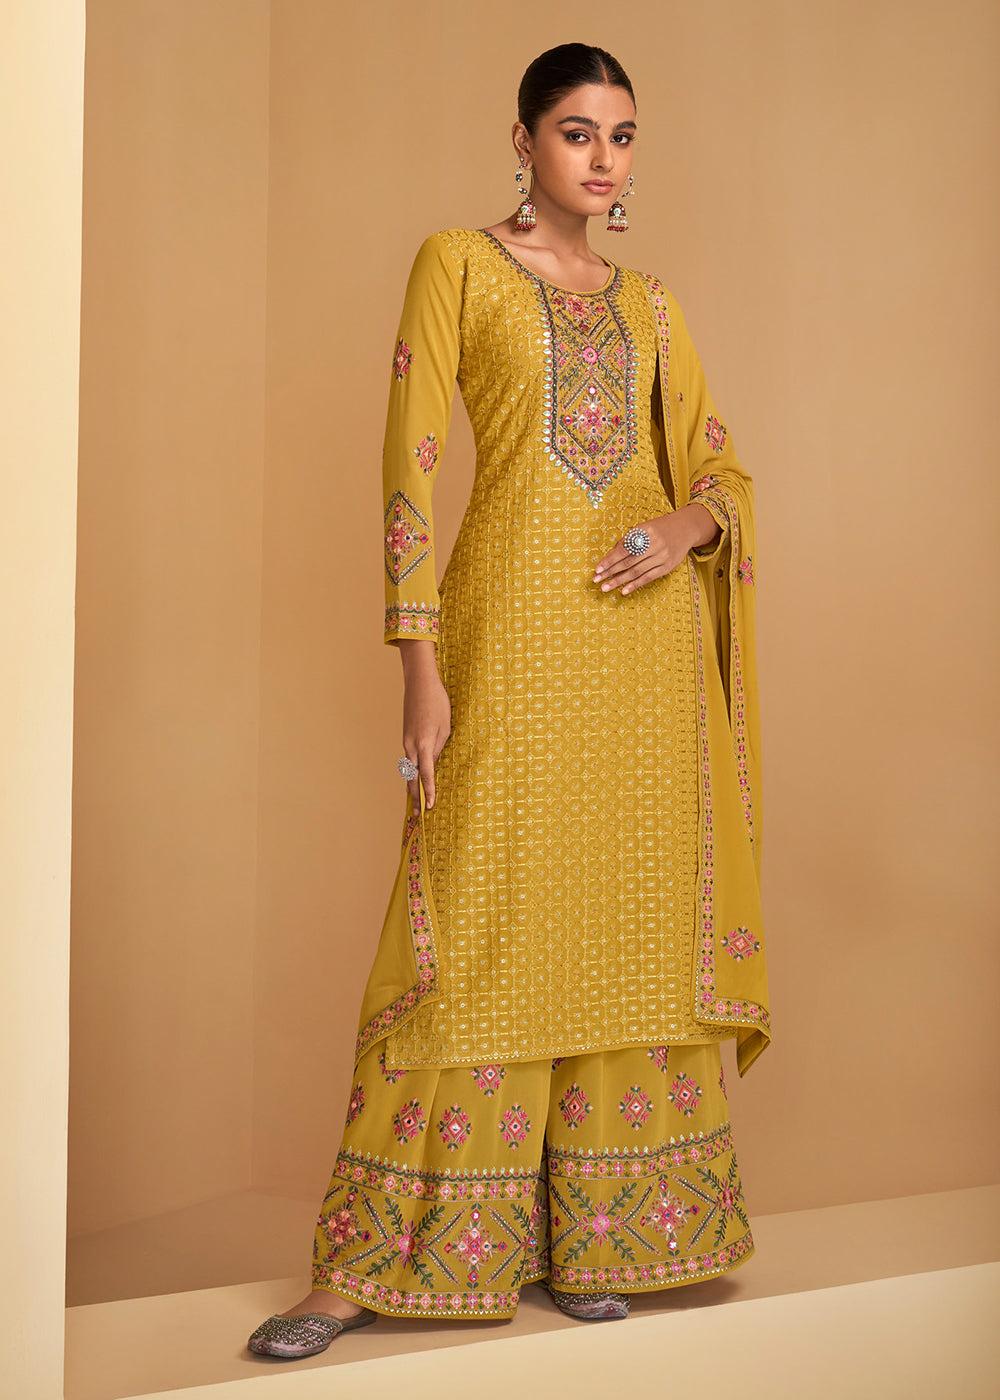 Buy Now Festive Look Yellow Floral Embroidered Palazzo Style Suit Online in USA, UK, Canada, Germany, Australia & Worldwide at Empress Clothing. 